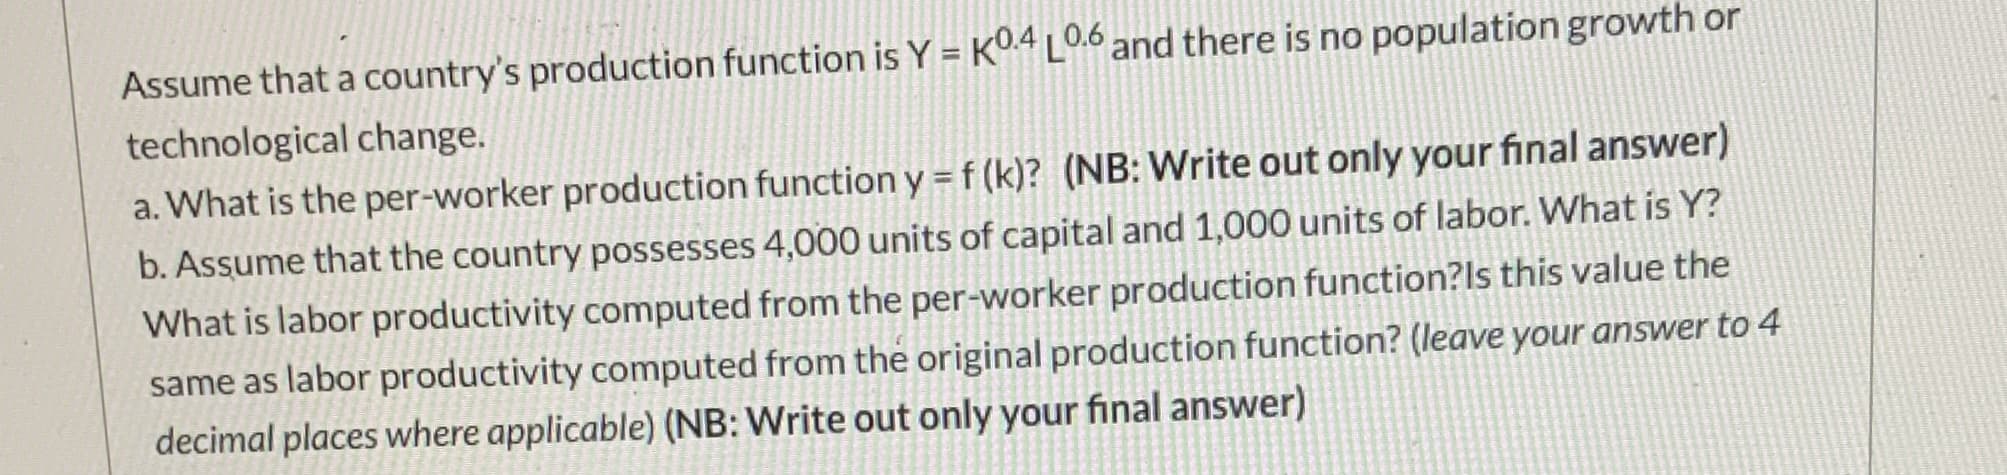 Assume that a country's production function is Y = KO4 LO.6 and there is no population growth or
technological change.
a. What is the per-worker production function y=f(k)? (NB: Write out only your final answer)
b. Assume that the country possesses 4,000 units of capital and 1,000 units of labor. What is Y?
What is labor productivity computed from the per-worker production function?ls this value the
same as labor productivity computed from the original production function? (leave your answer to 4
decimal places where applicable) (NB: Write out only your final answer)
